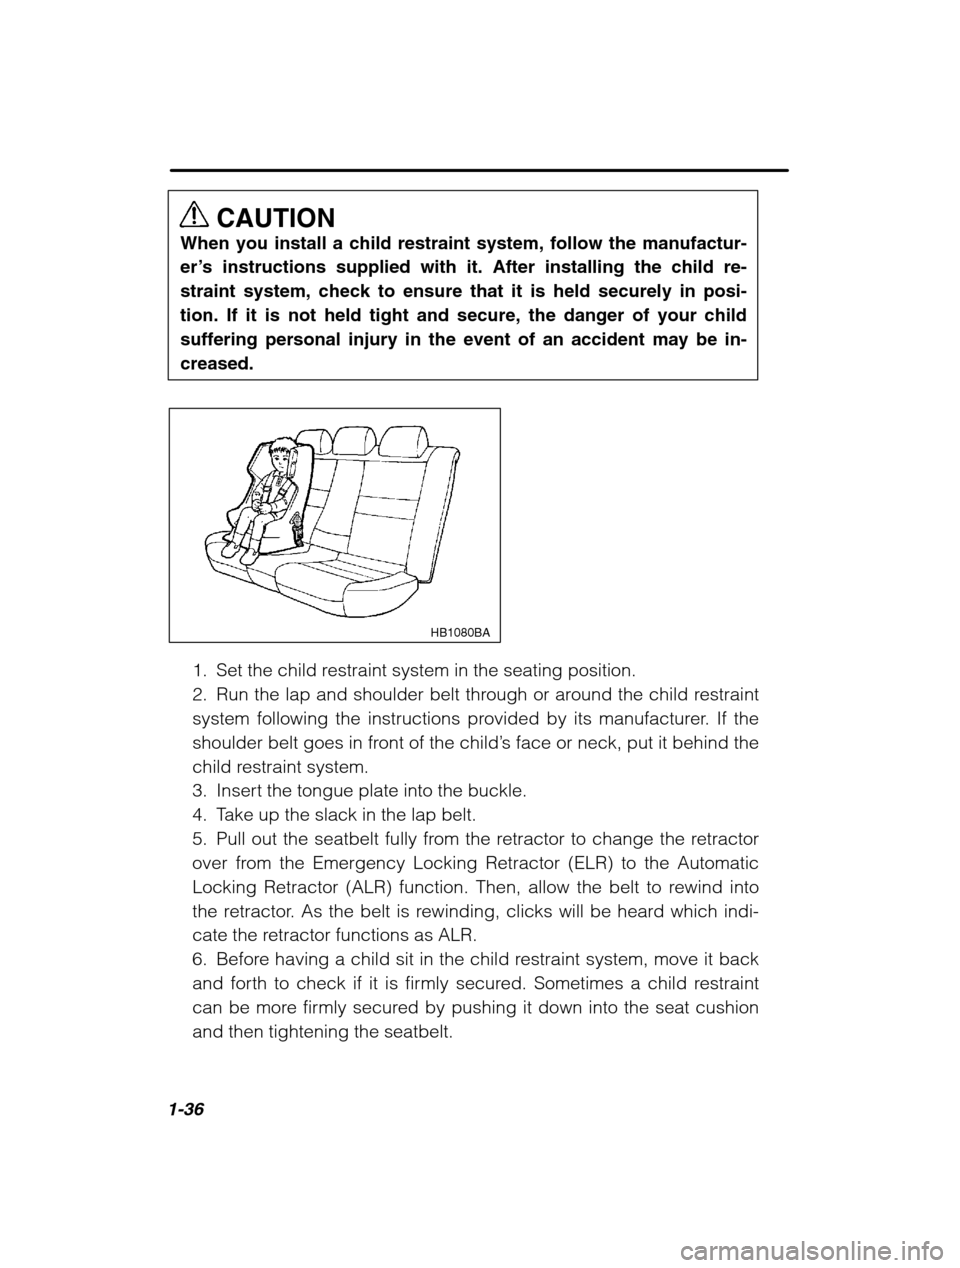 SUBARU OUTBACK 2002 3.G Service Manual 1-36
CAUTION
When you install a child restraint system, follow the manufactur- 
er’ s instructions supplied with it. After installing the child re-
straint system, check to ensure that it is held se